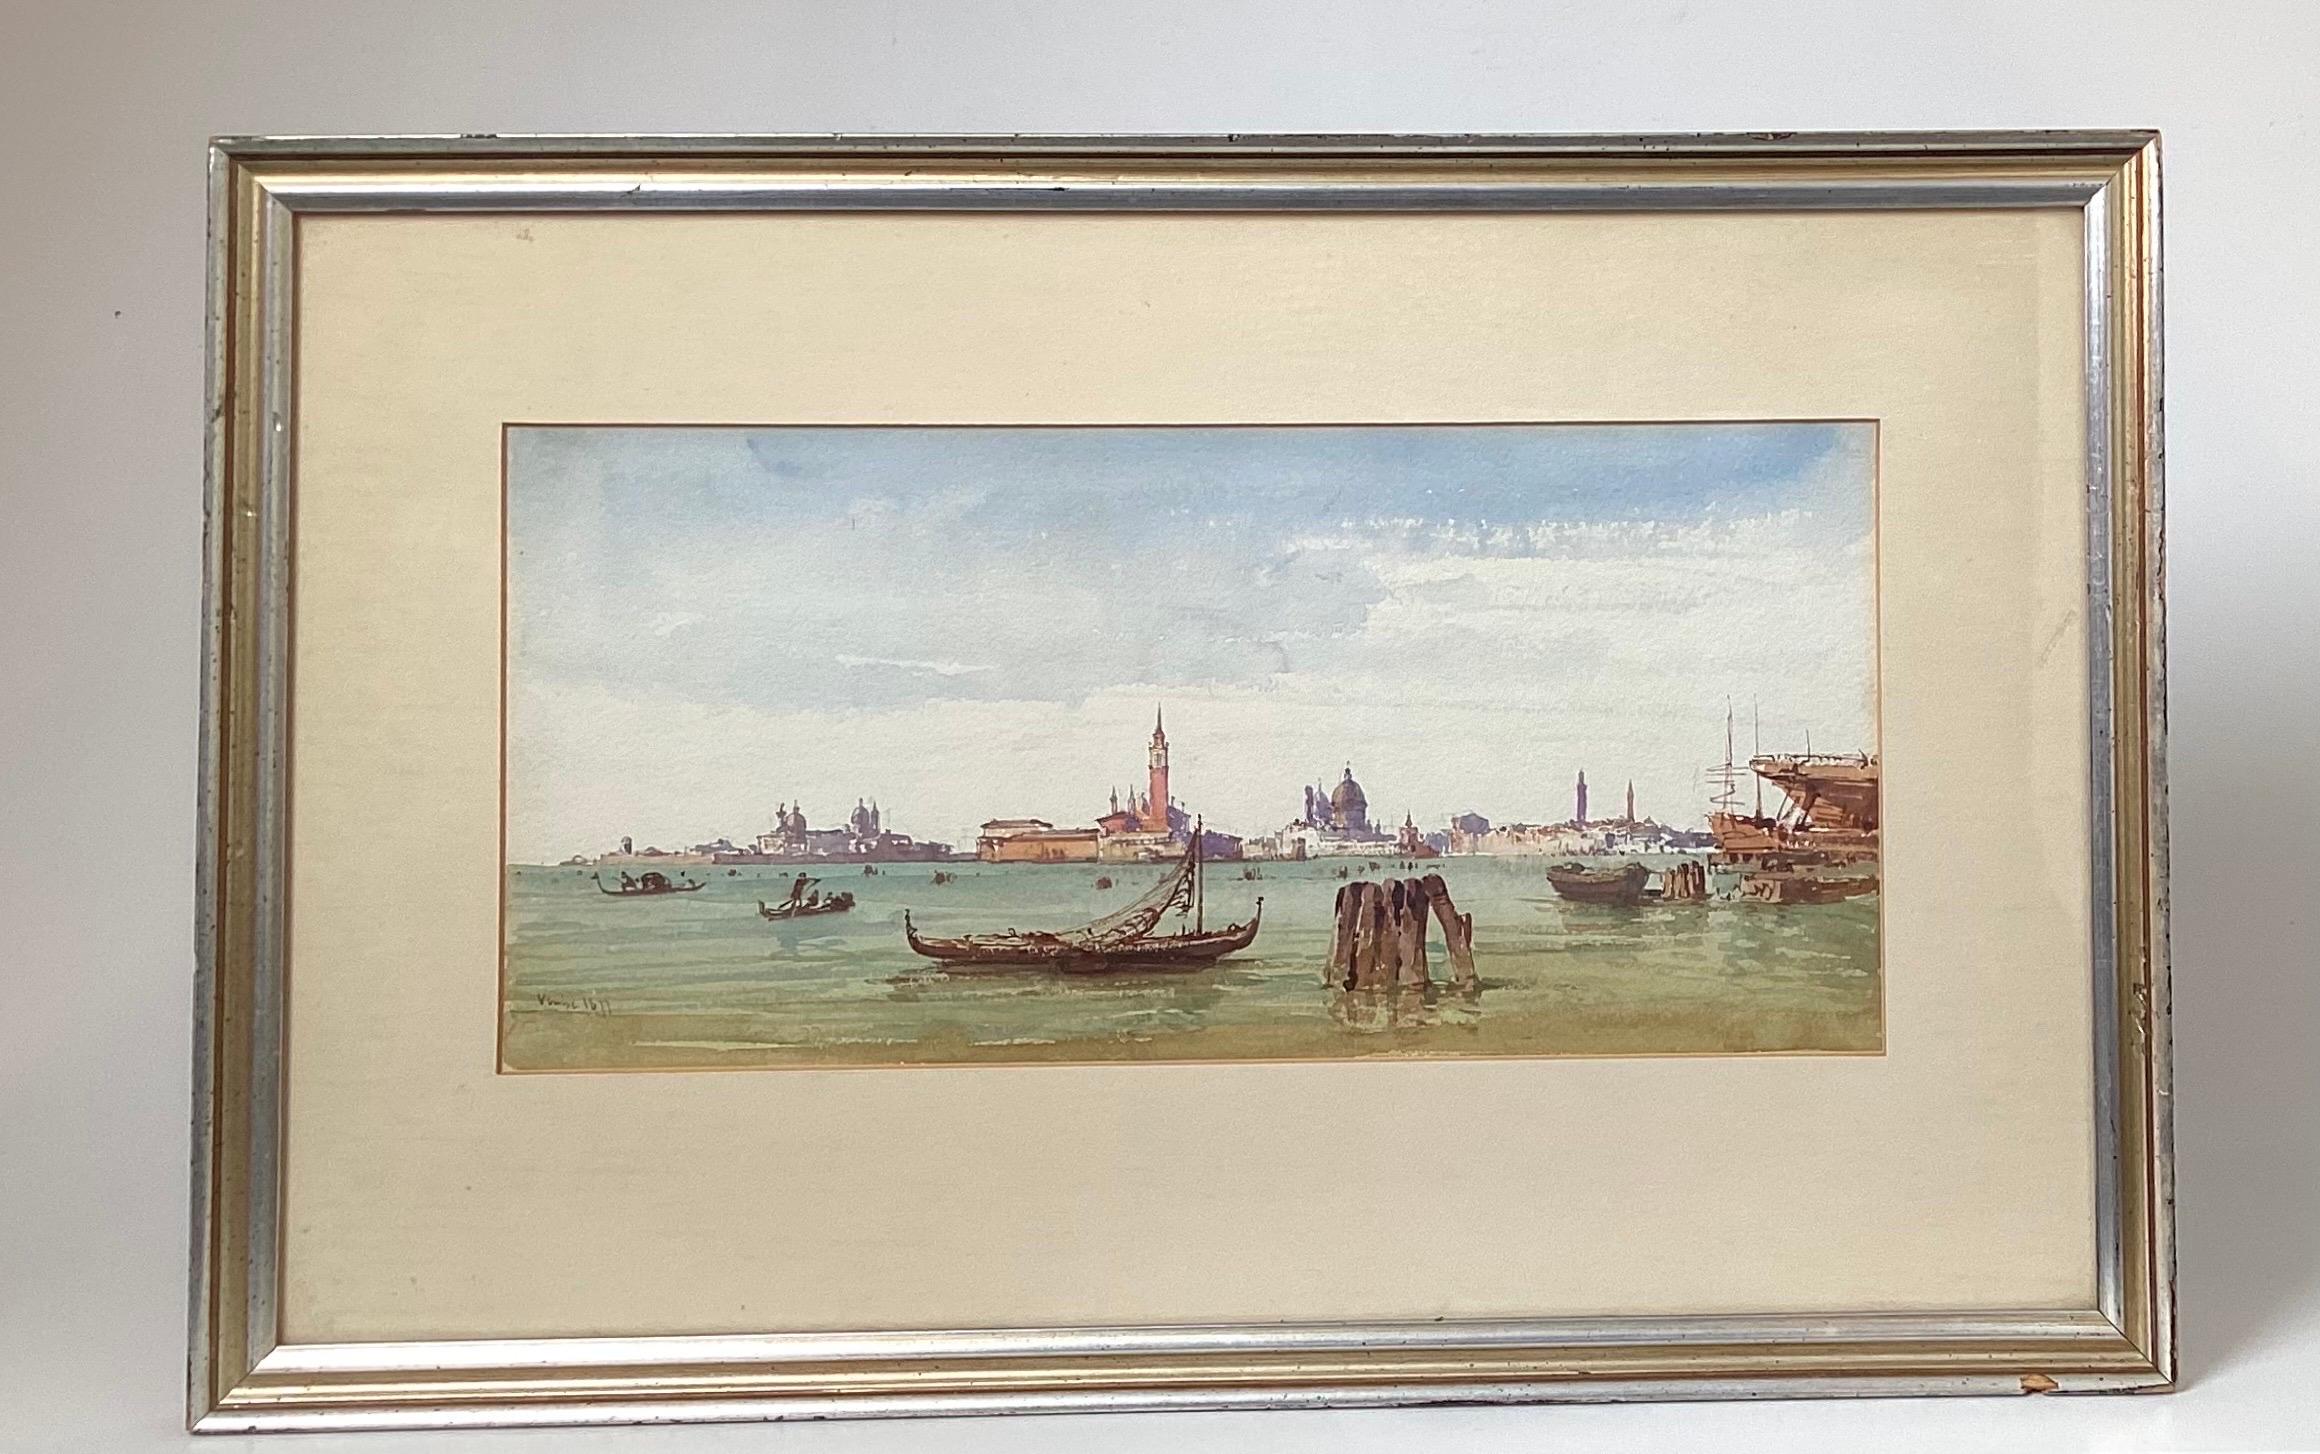 Early 20th century pair of original watercolors of Italy. Signed by the artist and nicely matted with a silver gilt frame.